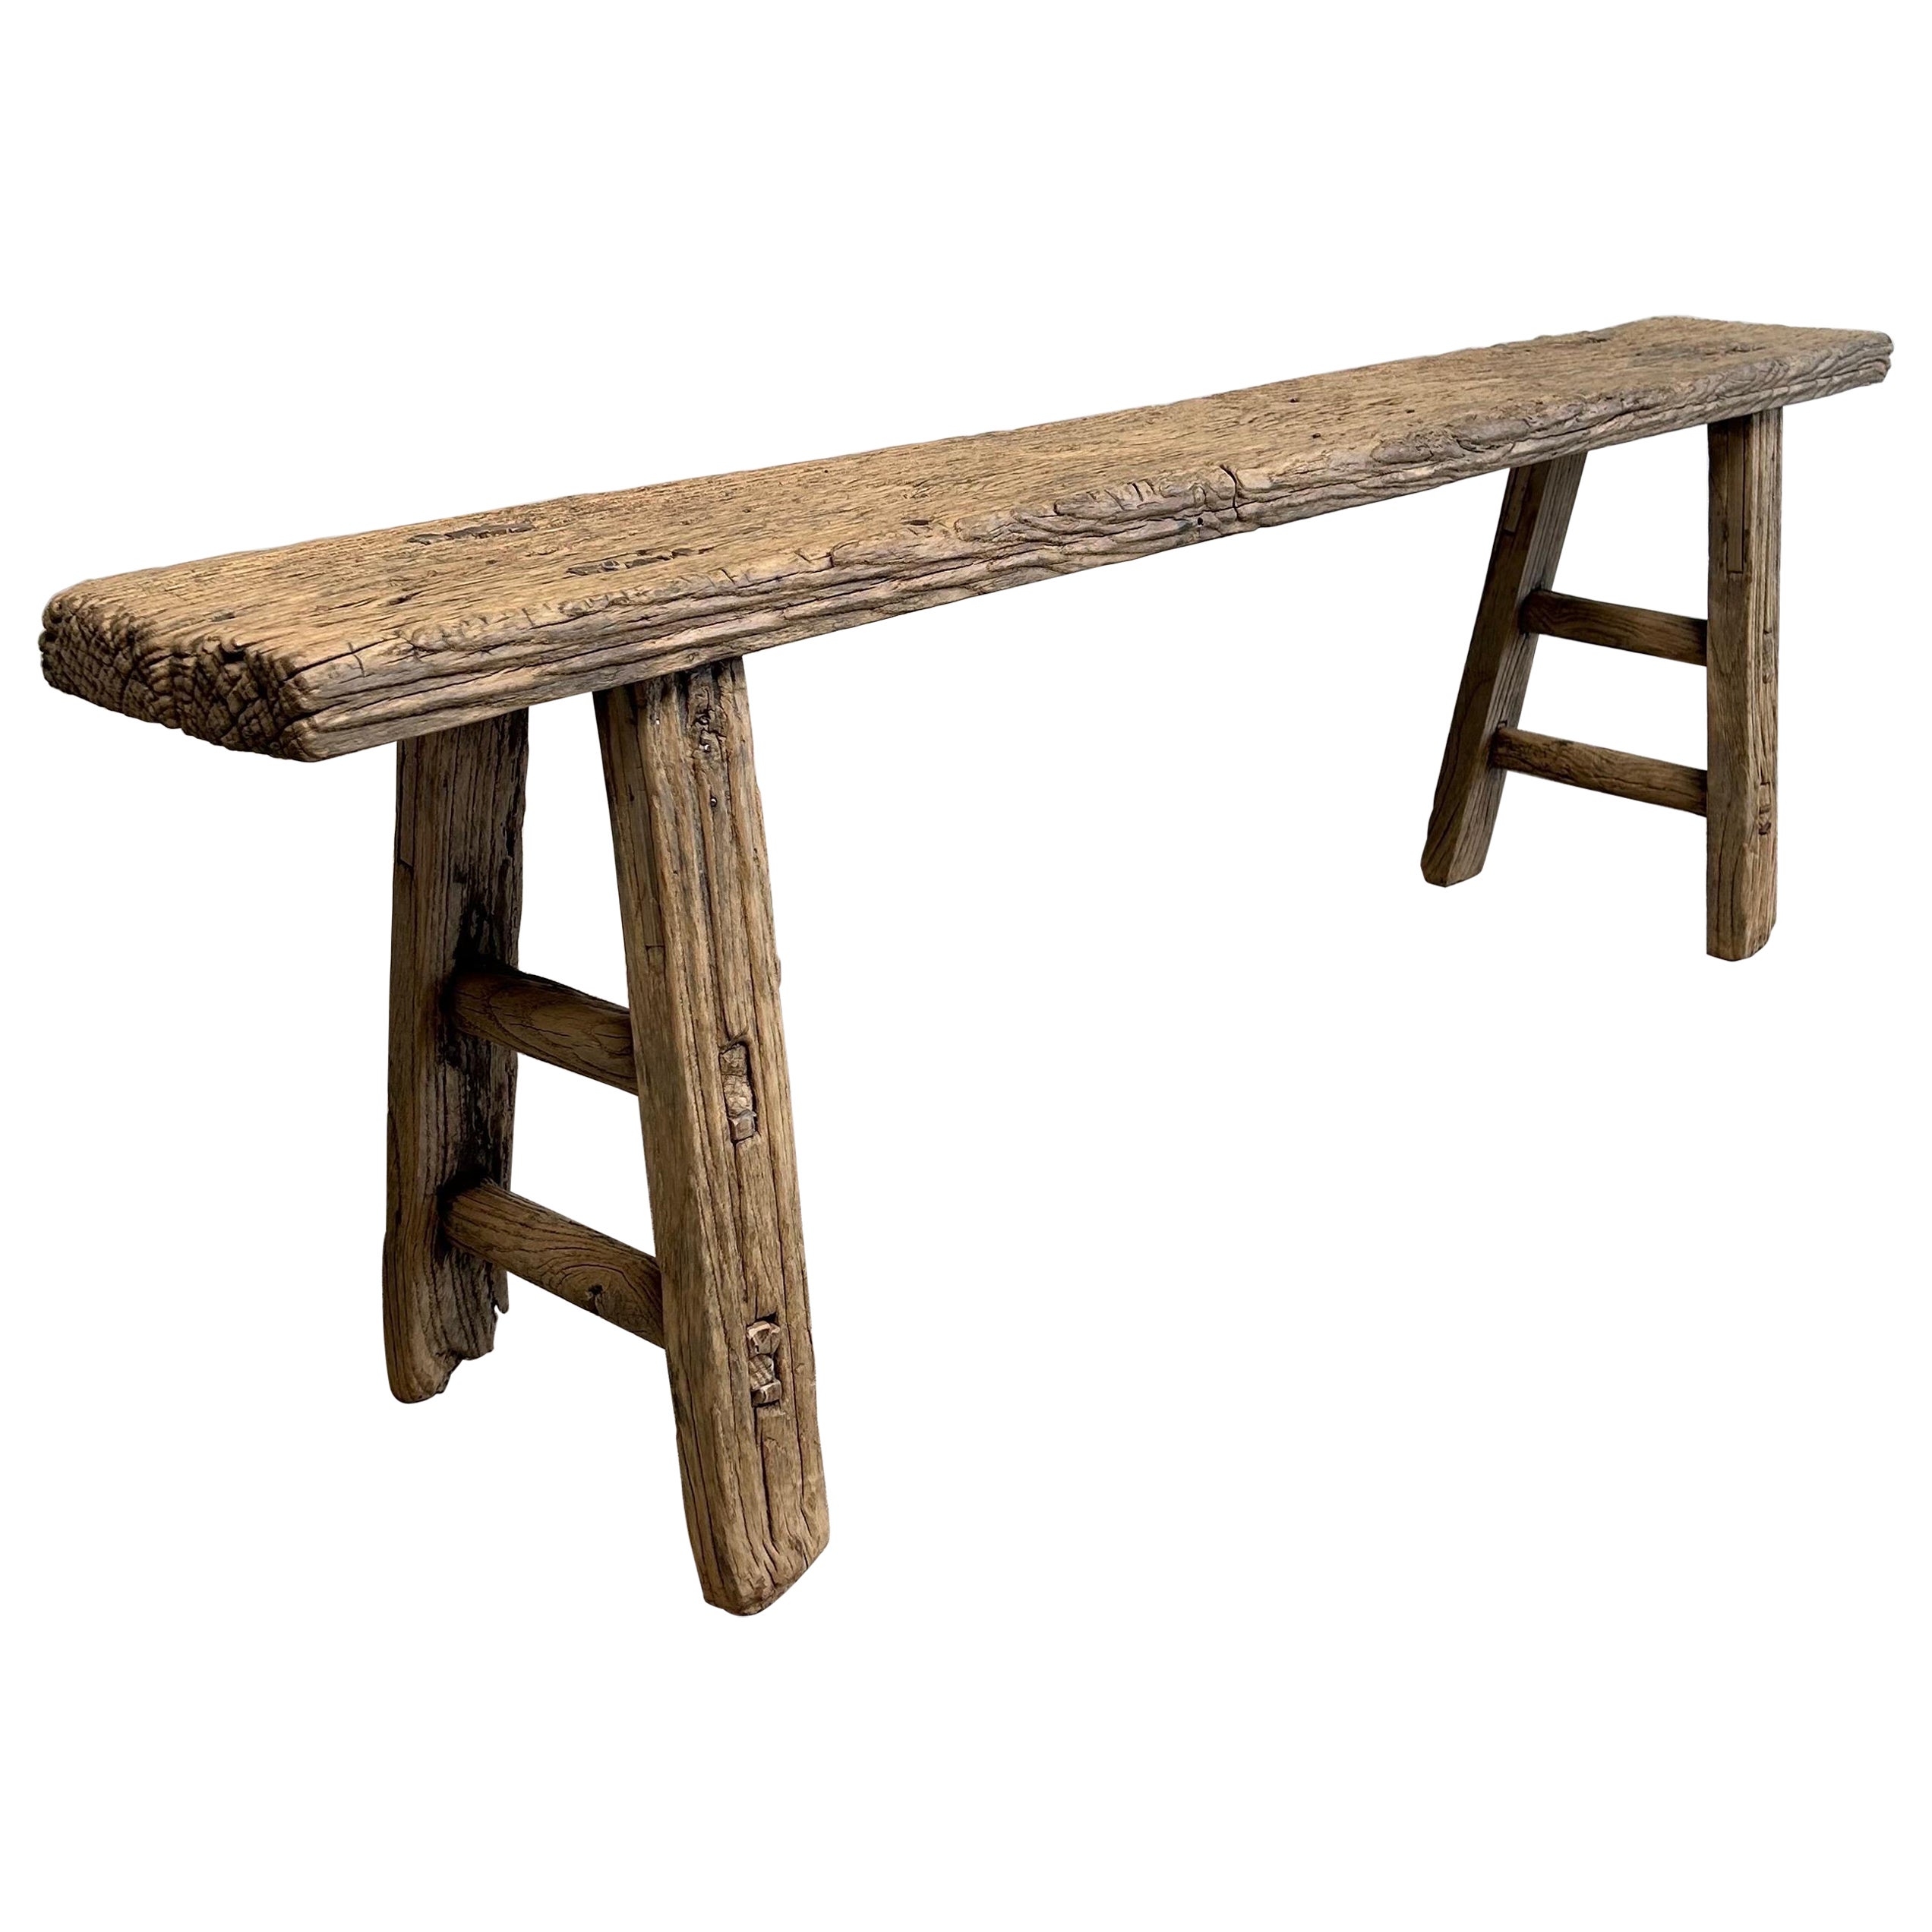 Vintage Elm Wood Bench with Aged Patina